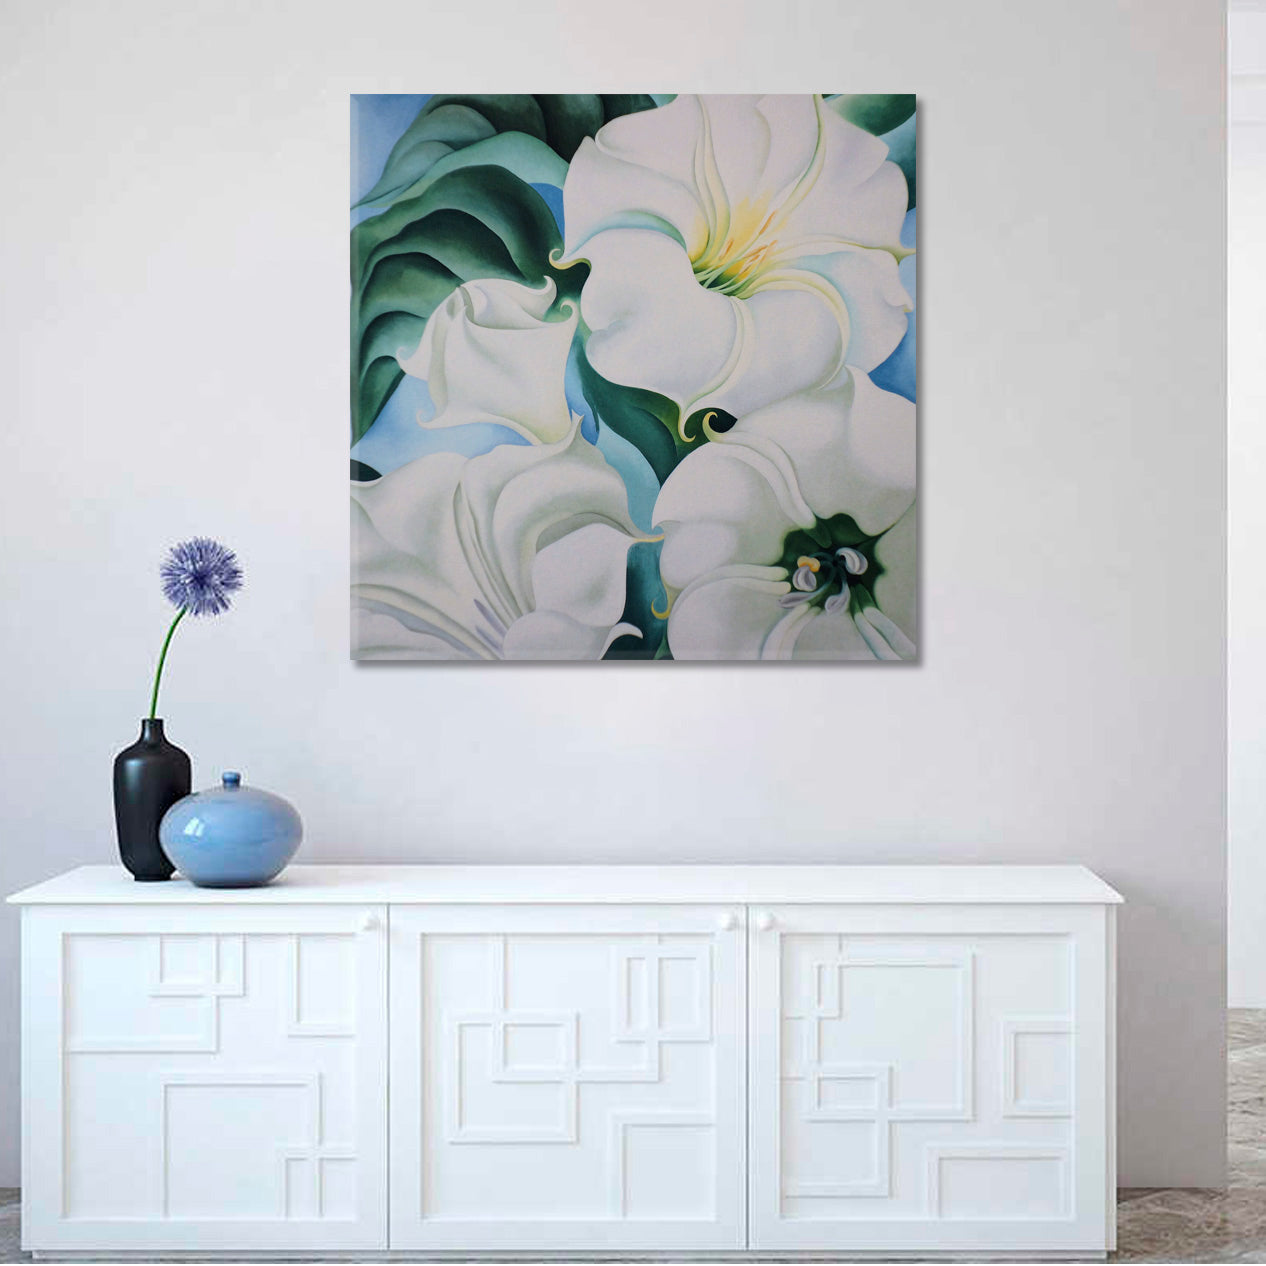 LILY BEAUTY IN DETAILS White Trumpet Lily Flower in Details  - Square Floral & Botanical Split Art Artesty 1 Panel 12"x12" 